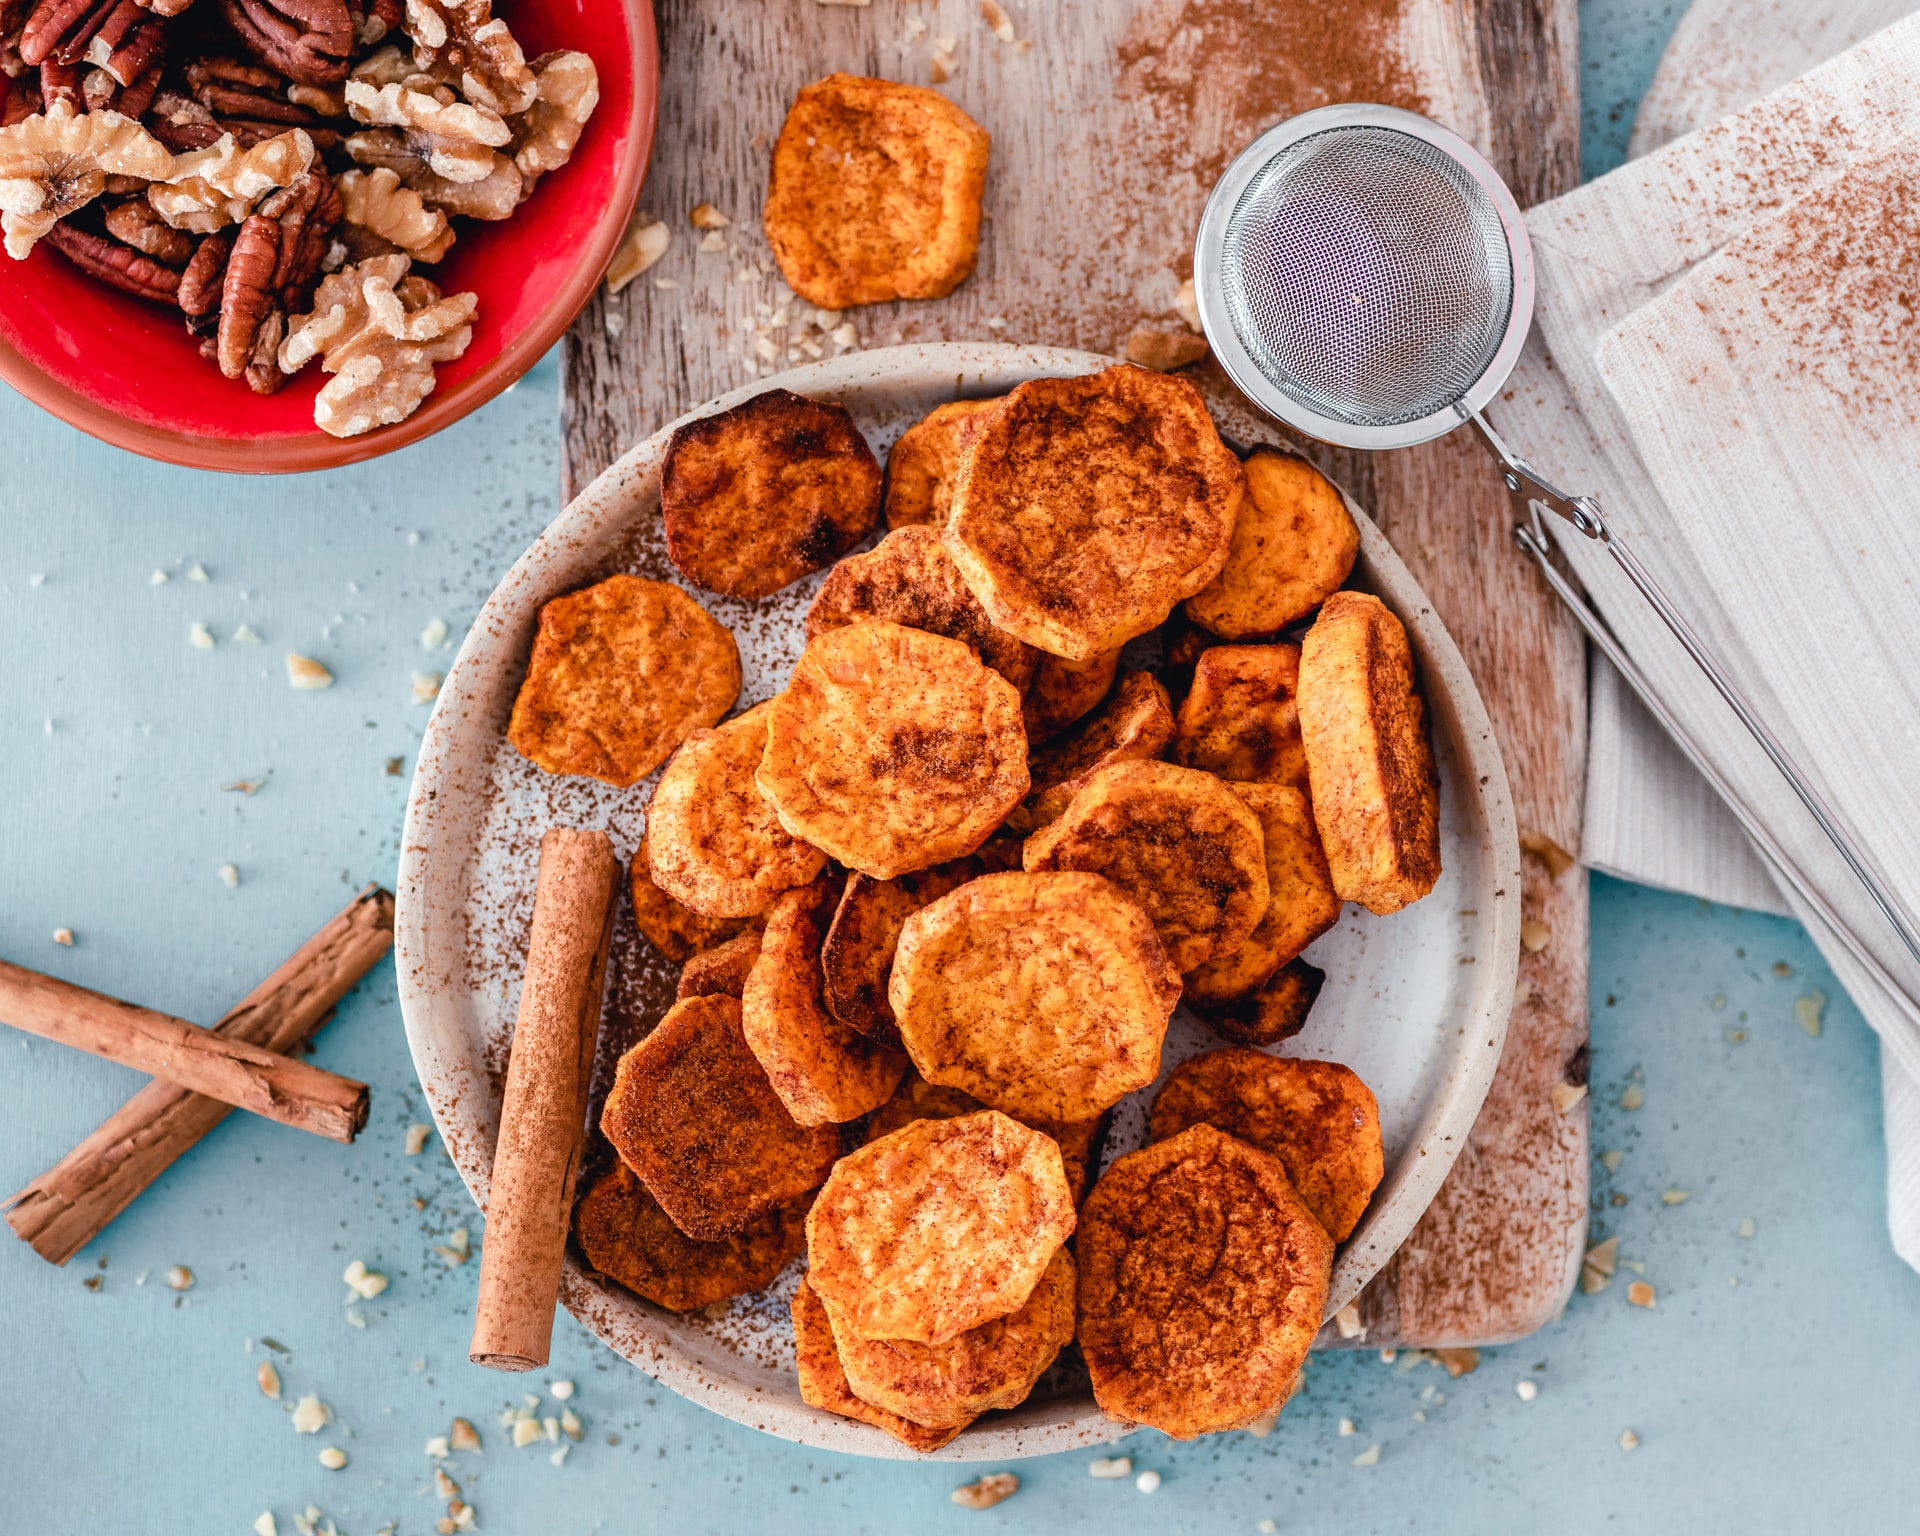 How Long to Air Fry Cut Up Sweet Potatoes?